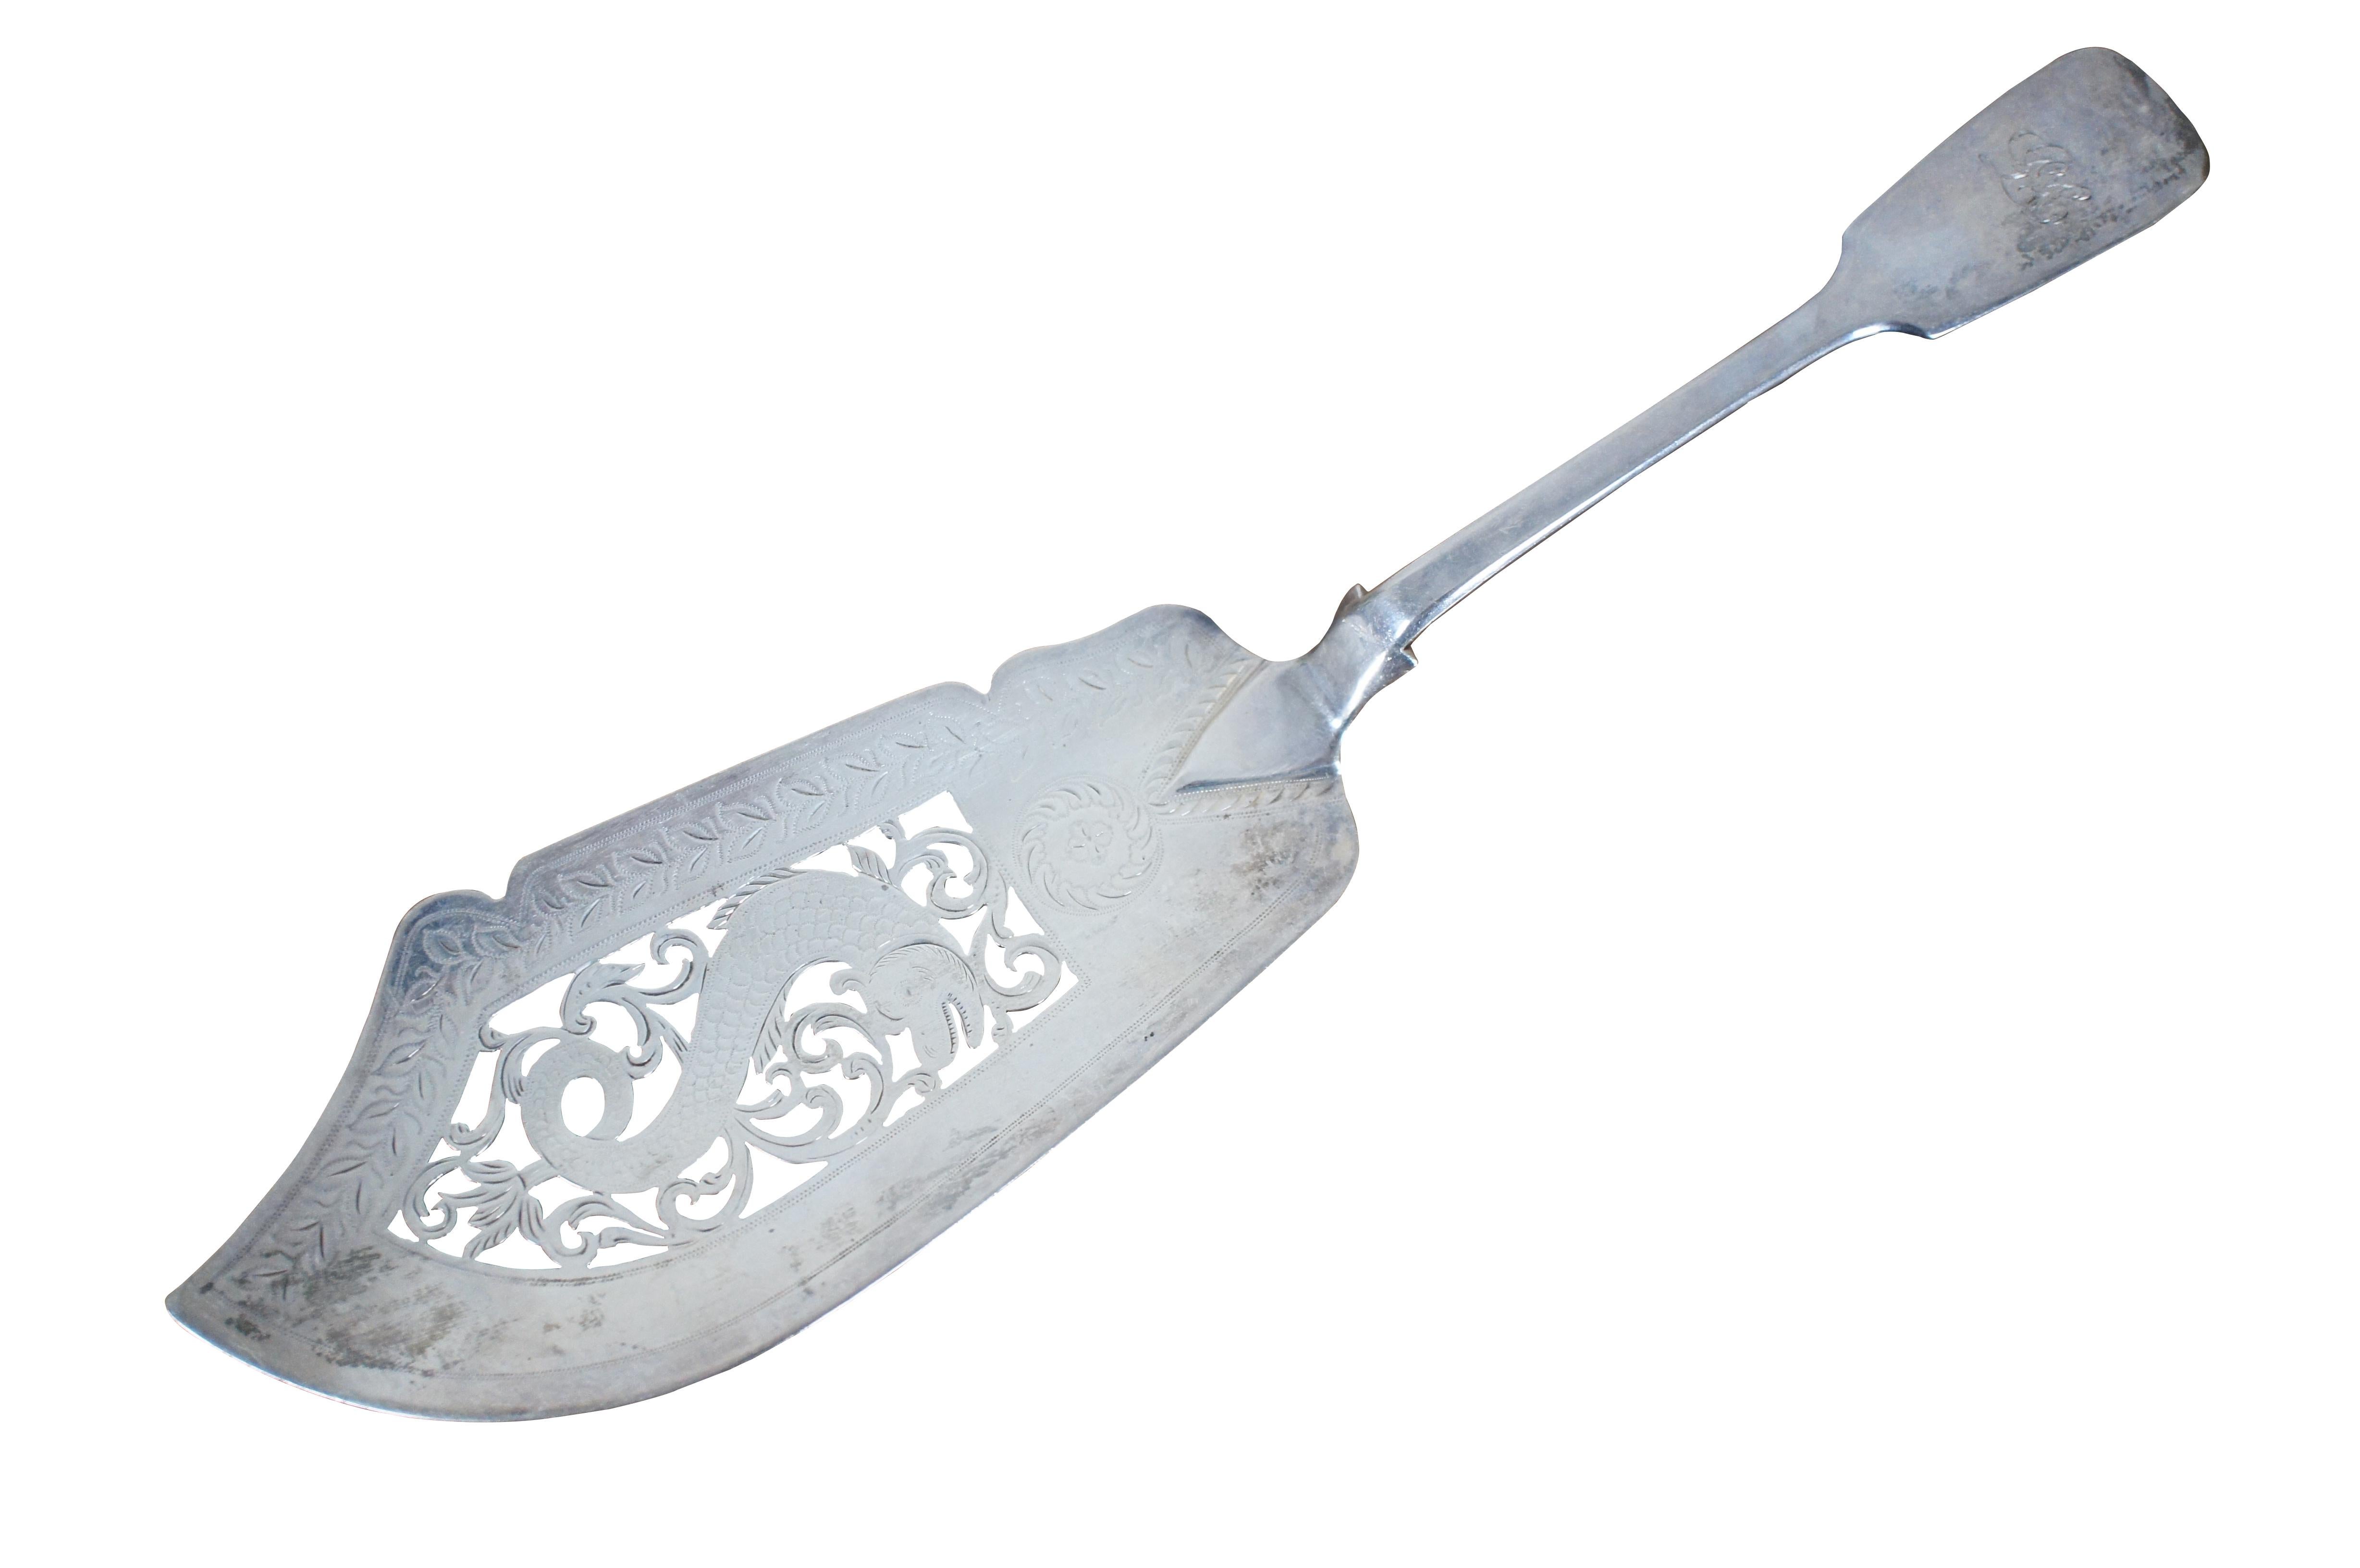 Antique English Victorian sterling silver fish / cake server featuring a tipped handle, etched leaf motif, and pierced foliate and dolphin / Fish Design; made in 1846 by Joseph II & Albert Savory of London. Handle monogrammed with the initials